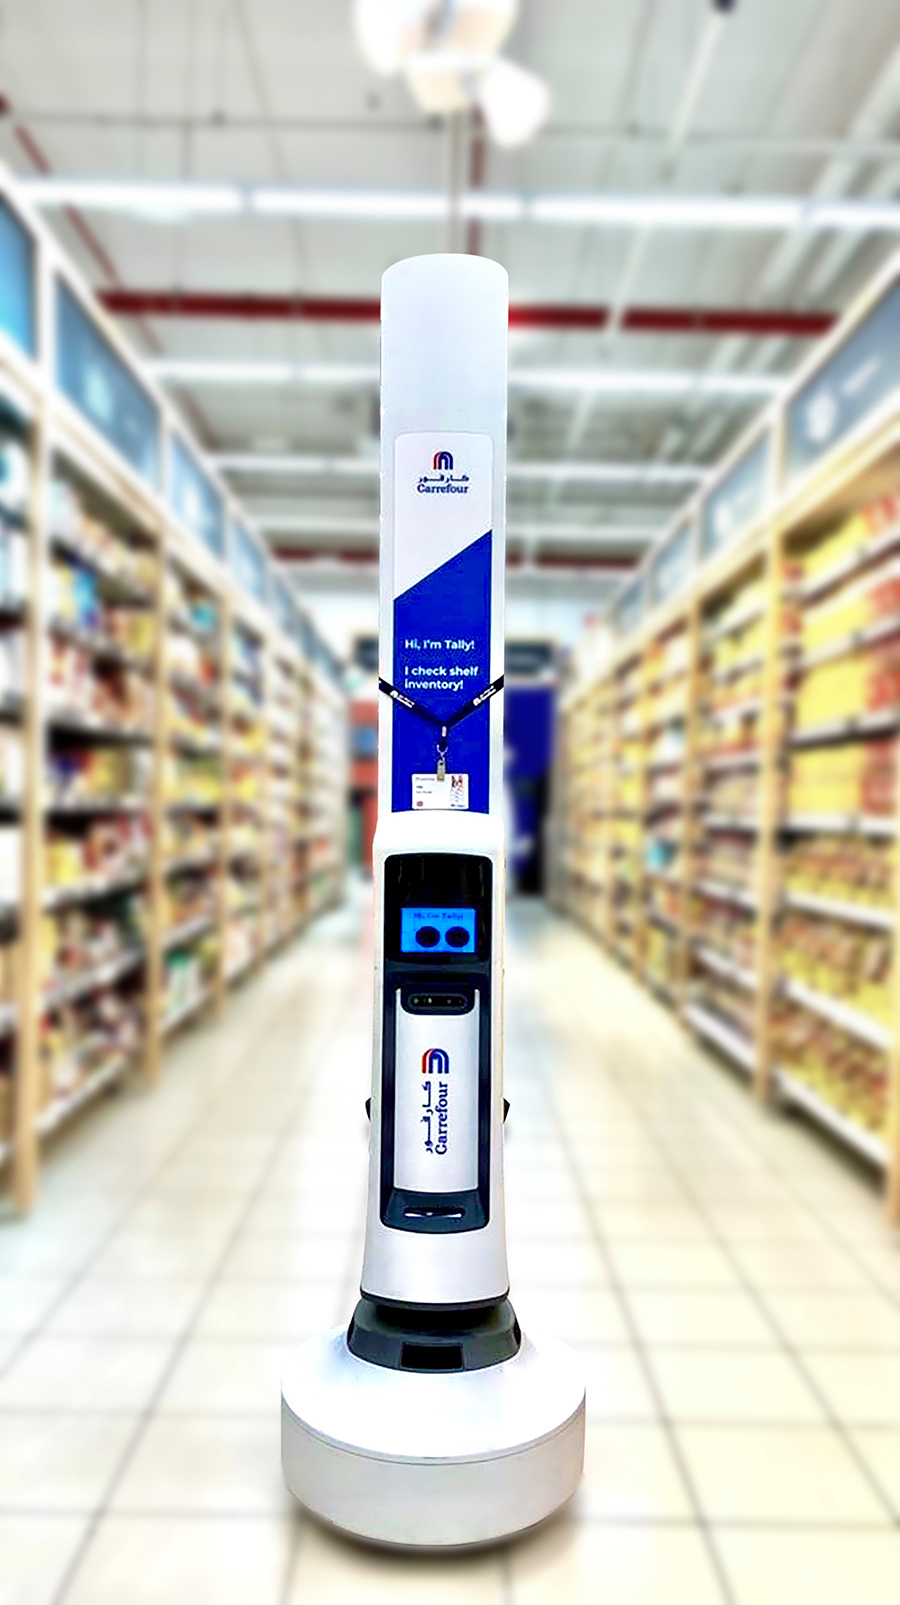 Carrefour Employs More Tally Robots Across Its Stores